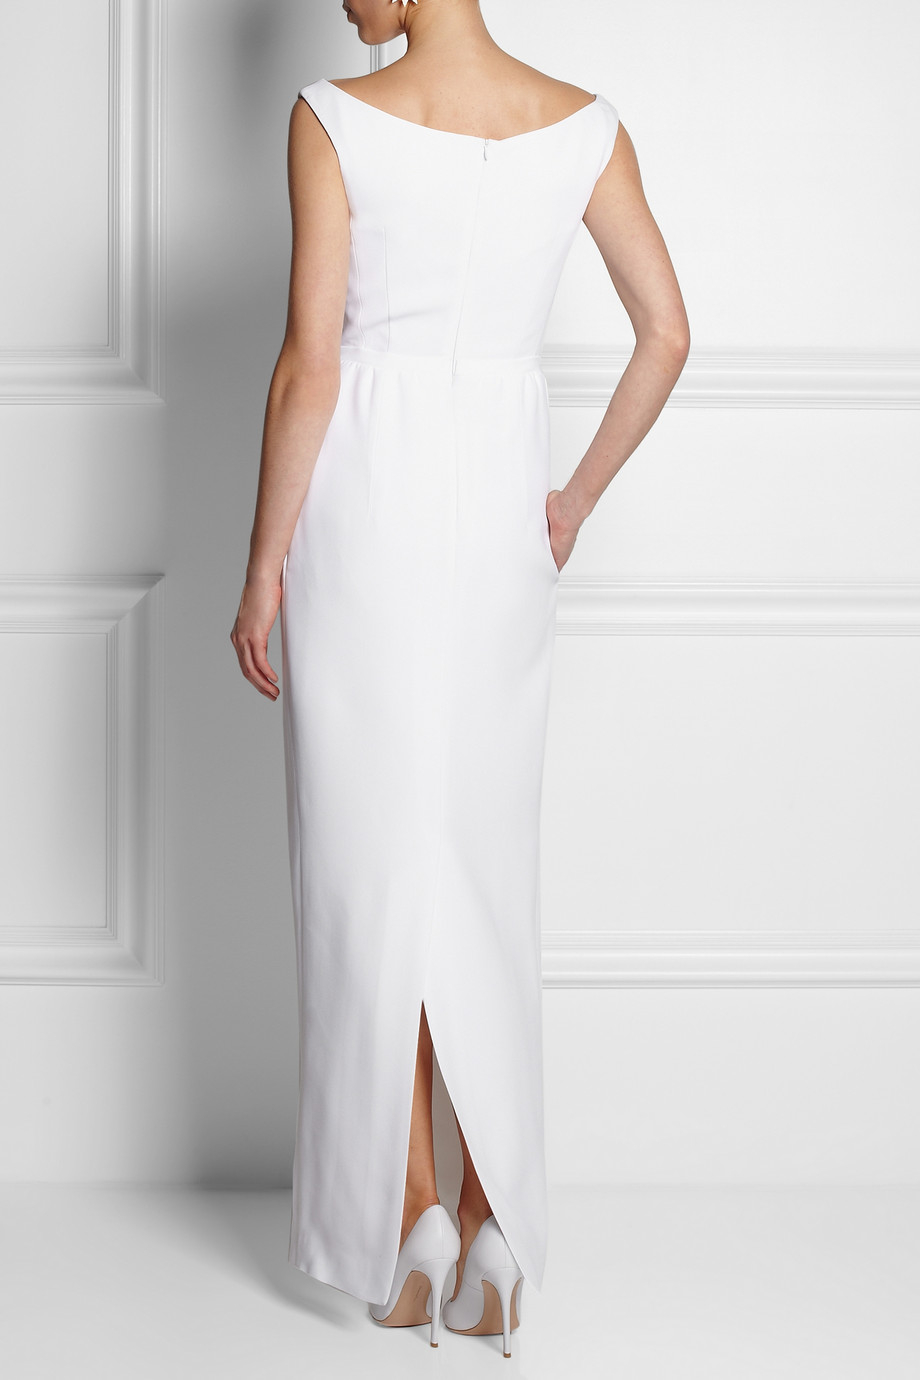 Lyst - Carven Crepe Maxi Dress in White